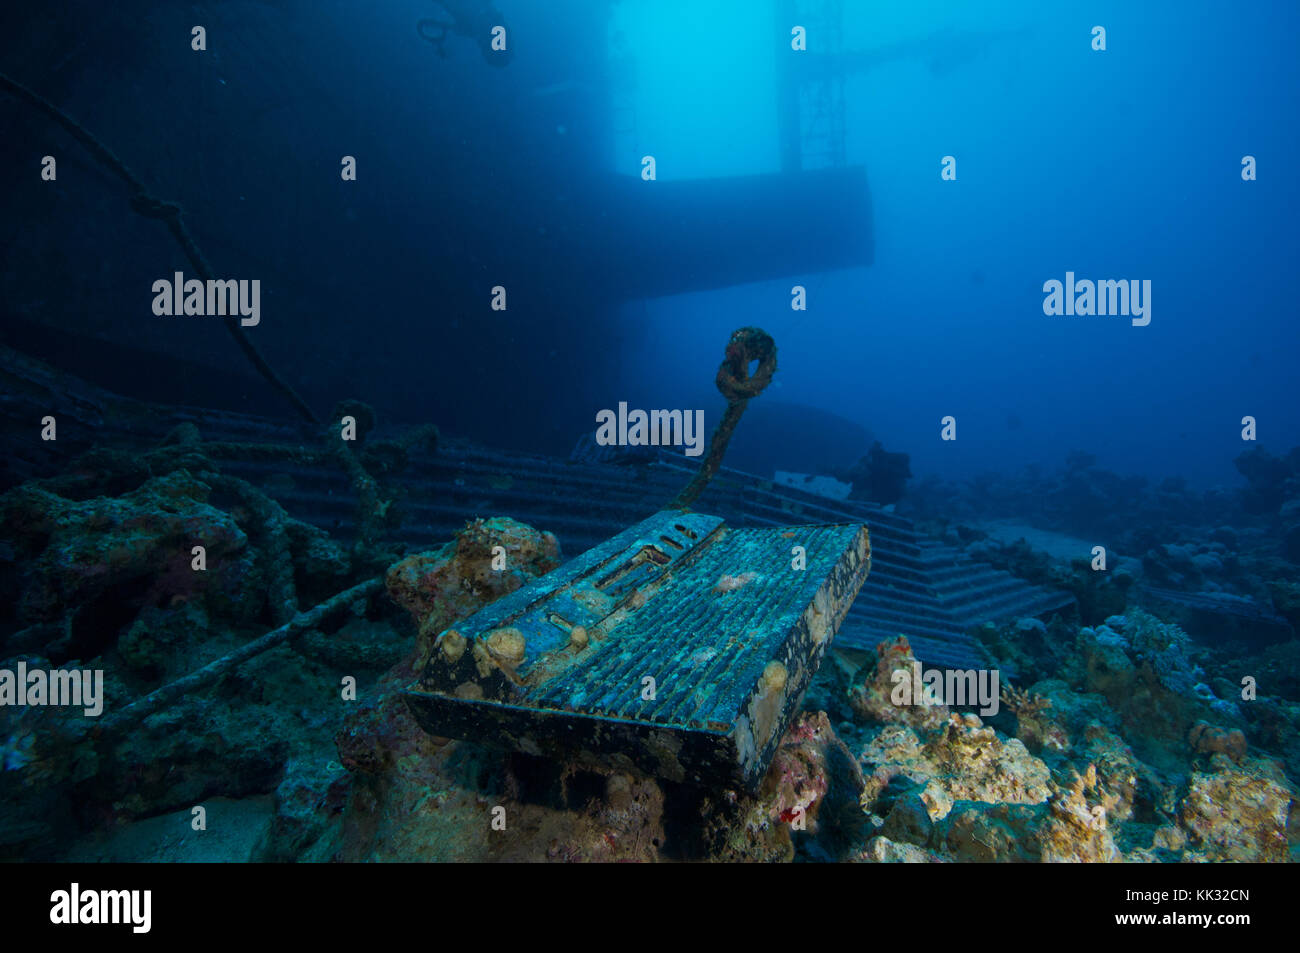 Salem Express ship wreck: An Atari 2600 games console lies next to the wreck of the Salem Express which sank in December 1991 with great loss of life. Stock Photo